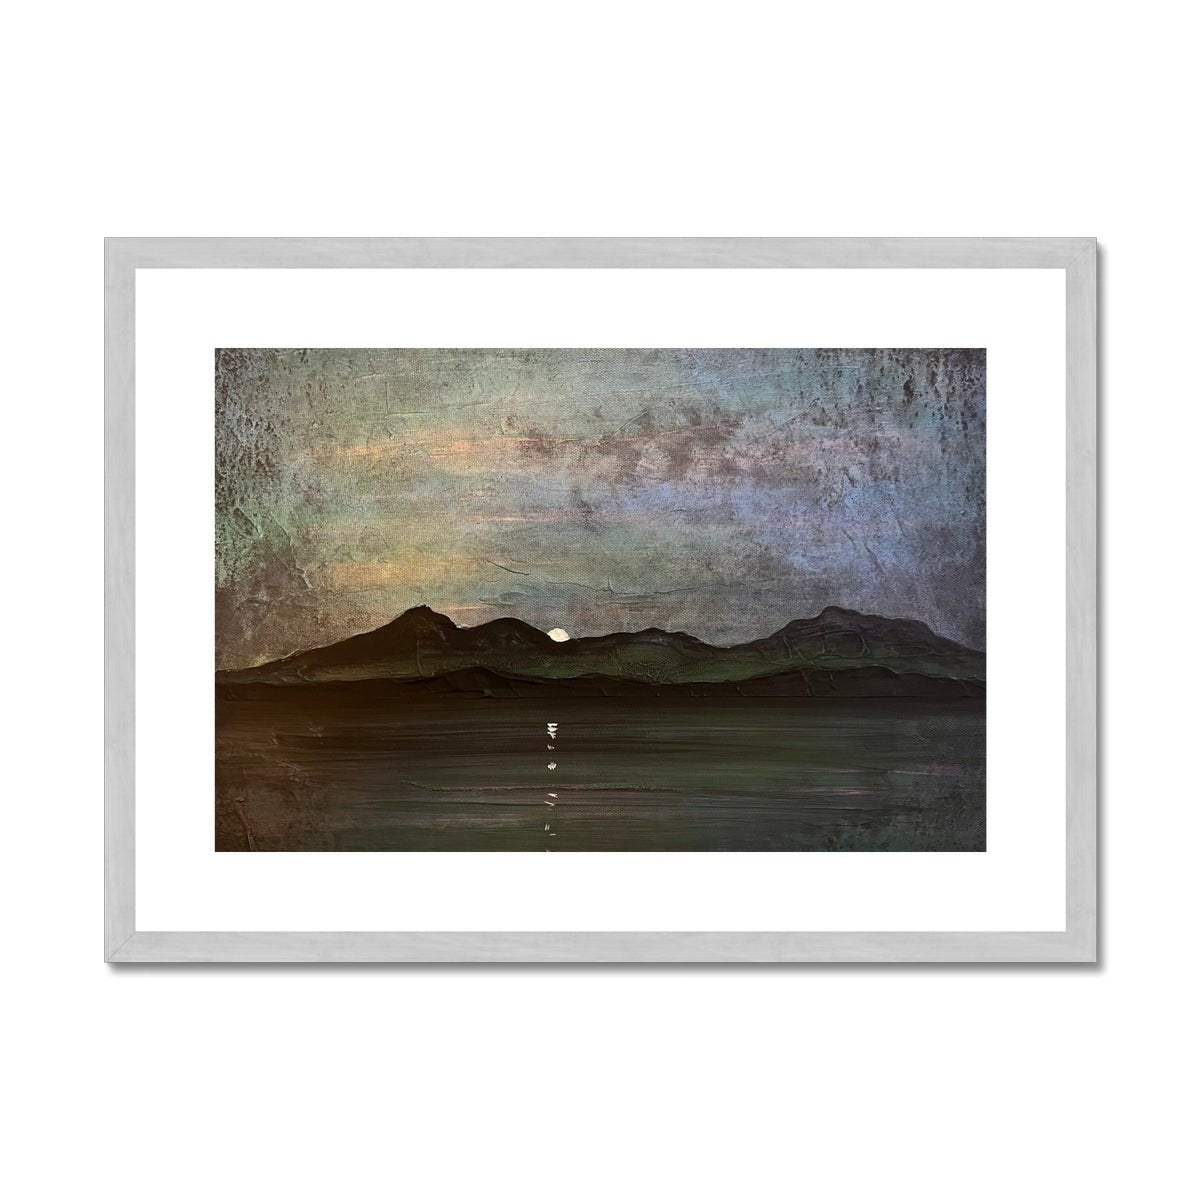 Sleeping Warrior Moonlight Arran Painting | Antique Framed & Mounted Prints From Scotland-Antique Framed & Mounted Prints-Arran Art Gallery-A2 Landscape-Silver Frame-Paintings, Prints, Homeware, Art Gifts From Scotland By Scottish Artist Kevin Hunter